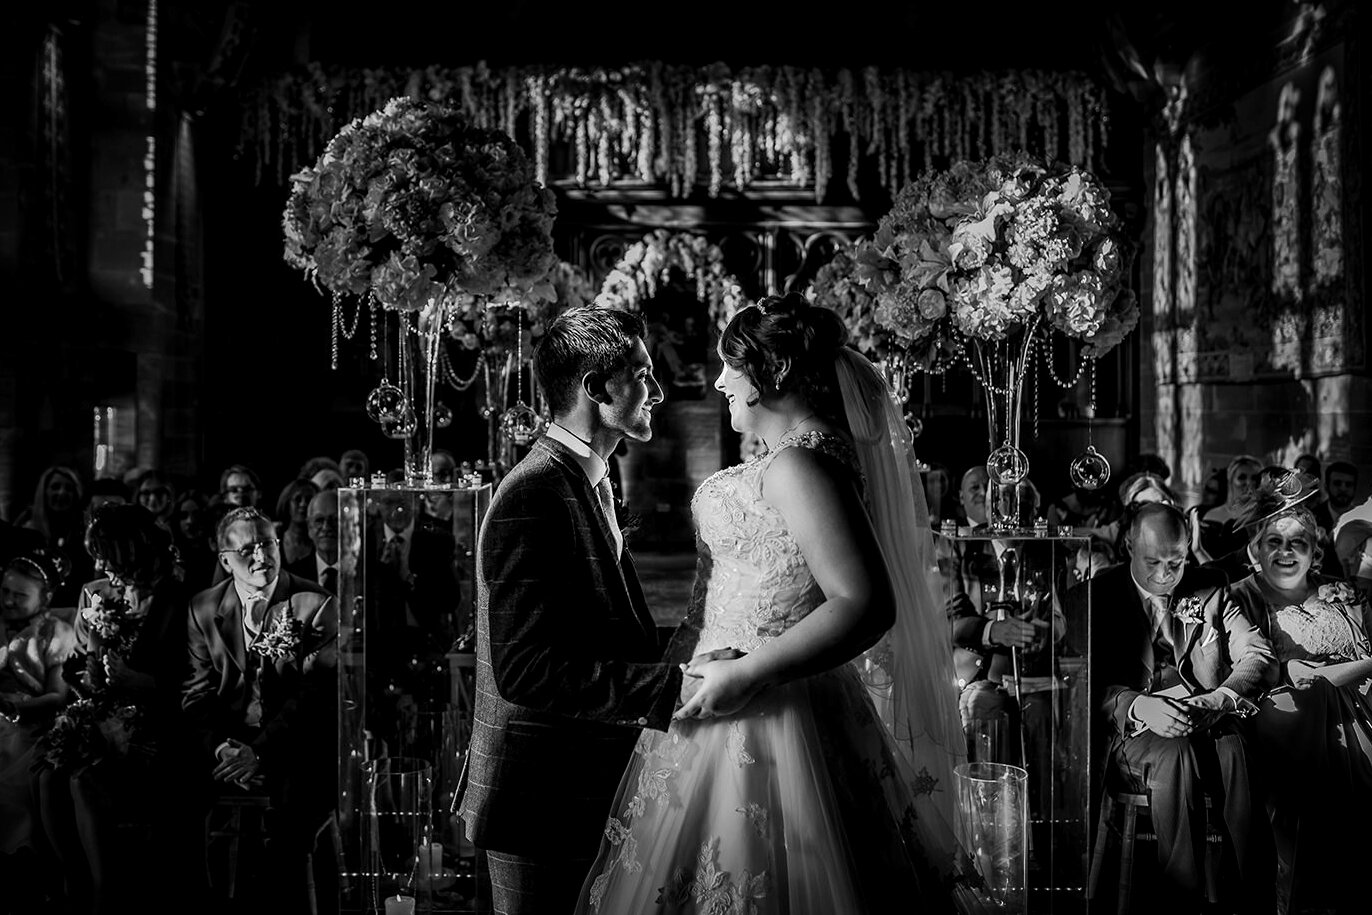  BW photo. Bride and groom saying vows in the great hall. 